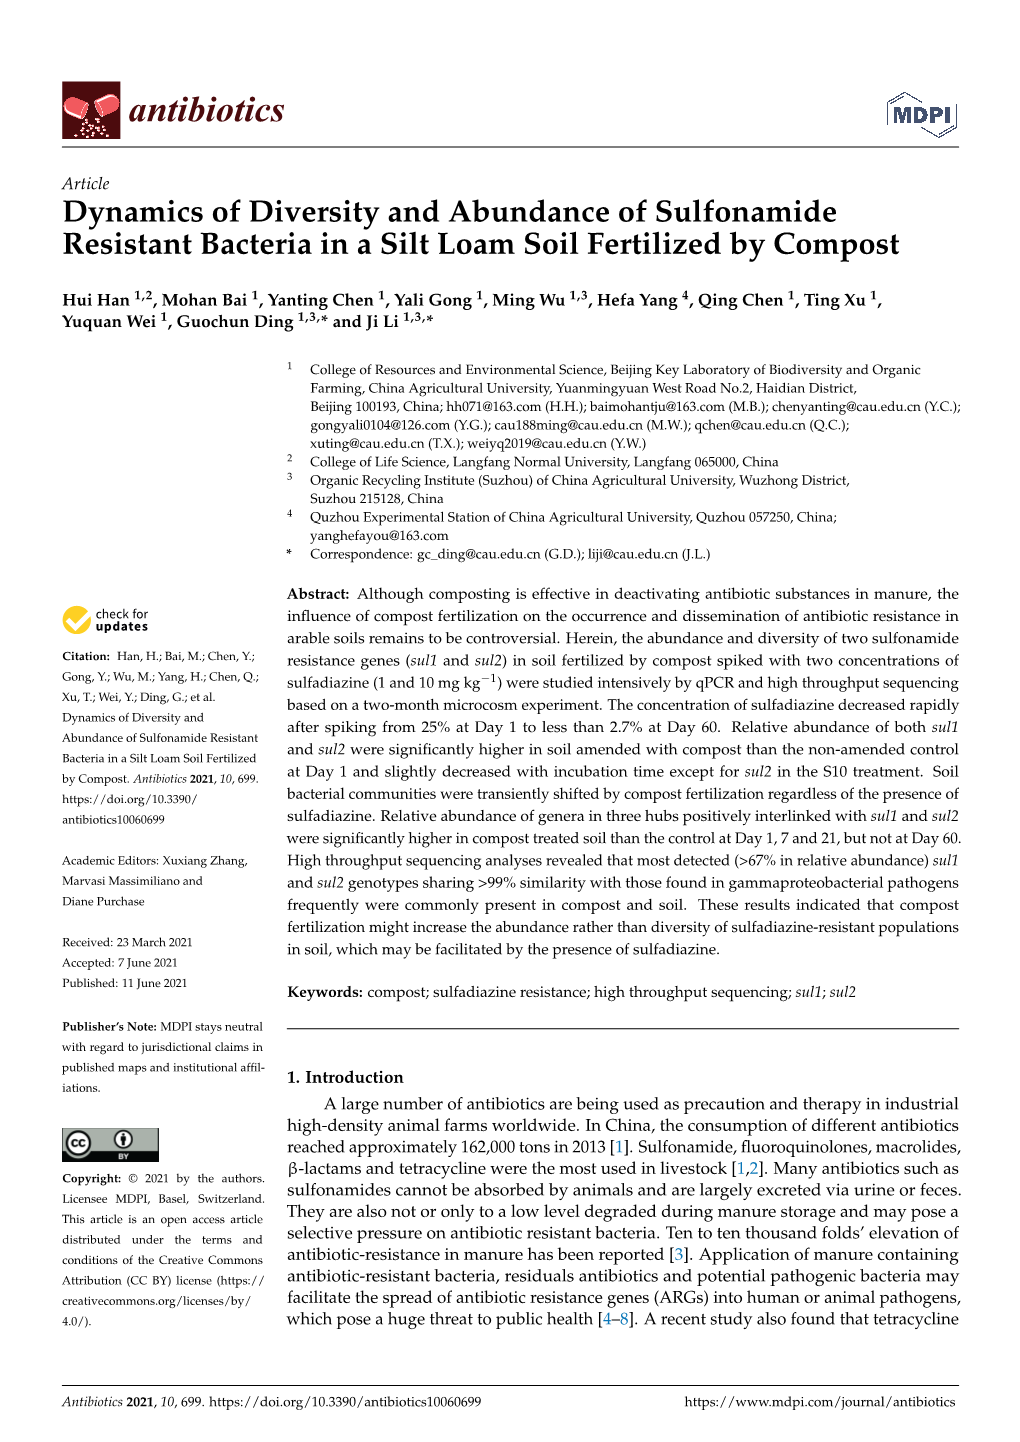 Dynamics of Diversity and Abundance of Sulfonamide Resistant Bacteria in a Silt Loam Soil Fertilized by Compost